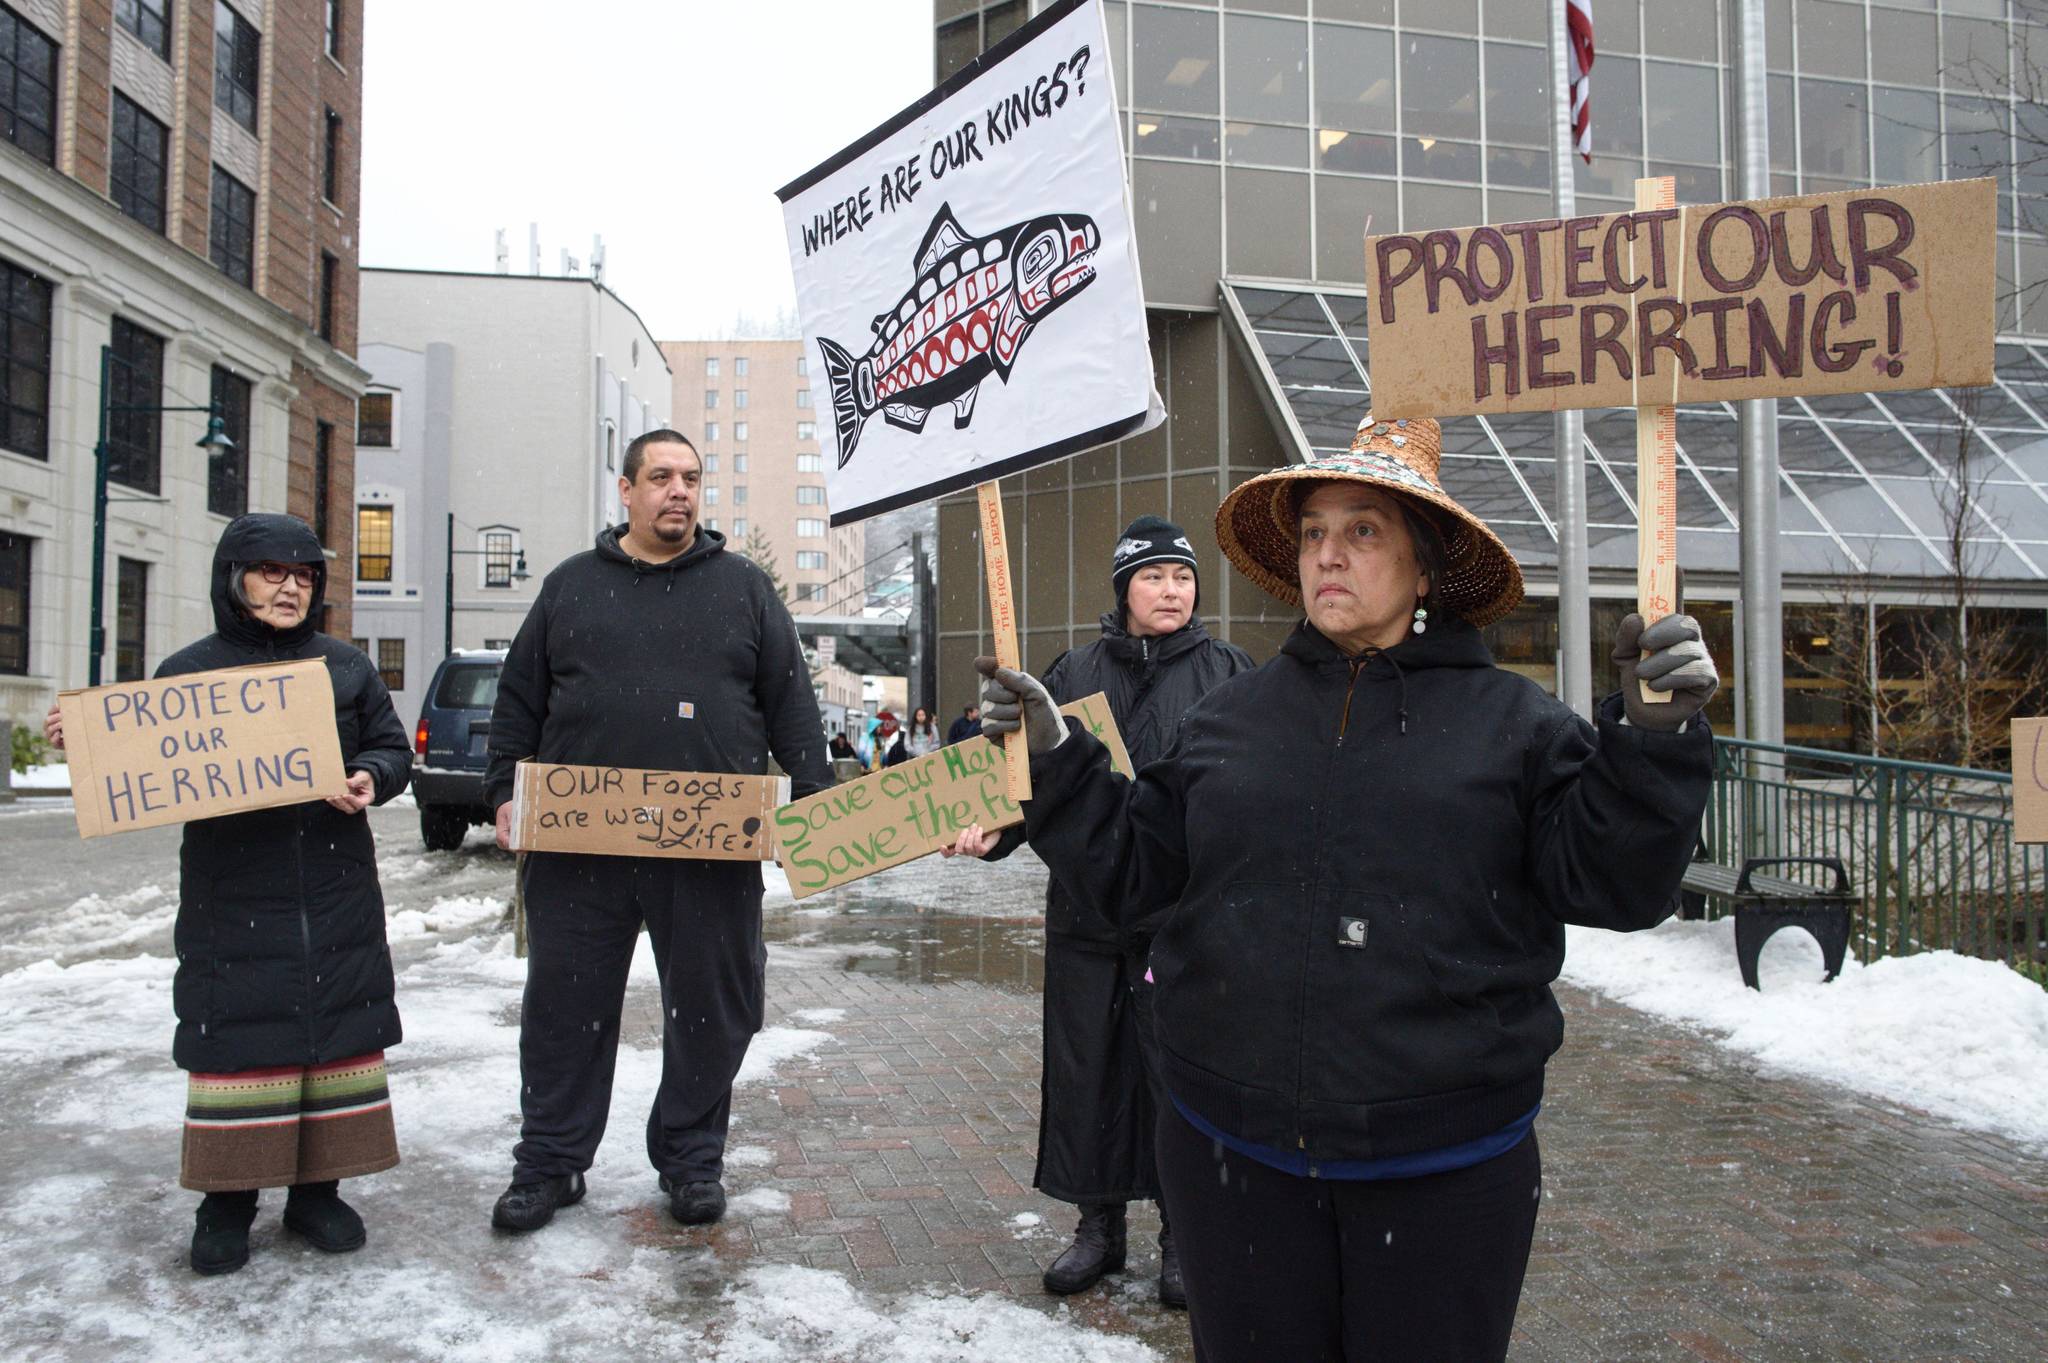 Nancy Keen, right, Vivian Mork, Marvin Willard and Rosita Worl, left, hold a protest outside the Dimond Courthouse as a court hearing between the Sitka Tribe of Alaska and the Department of Fish and Game on herring limits in Sitka Sound takes place inside on Tuesday, Feb. 18, 2019. (Michael Penn | Juneau Empire)